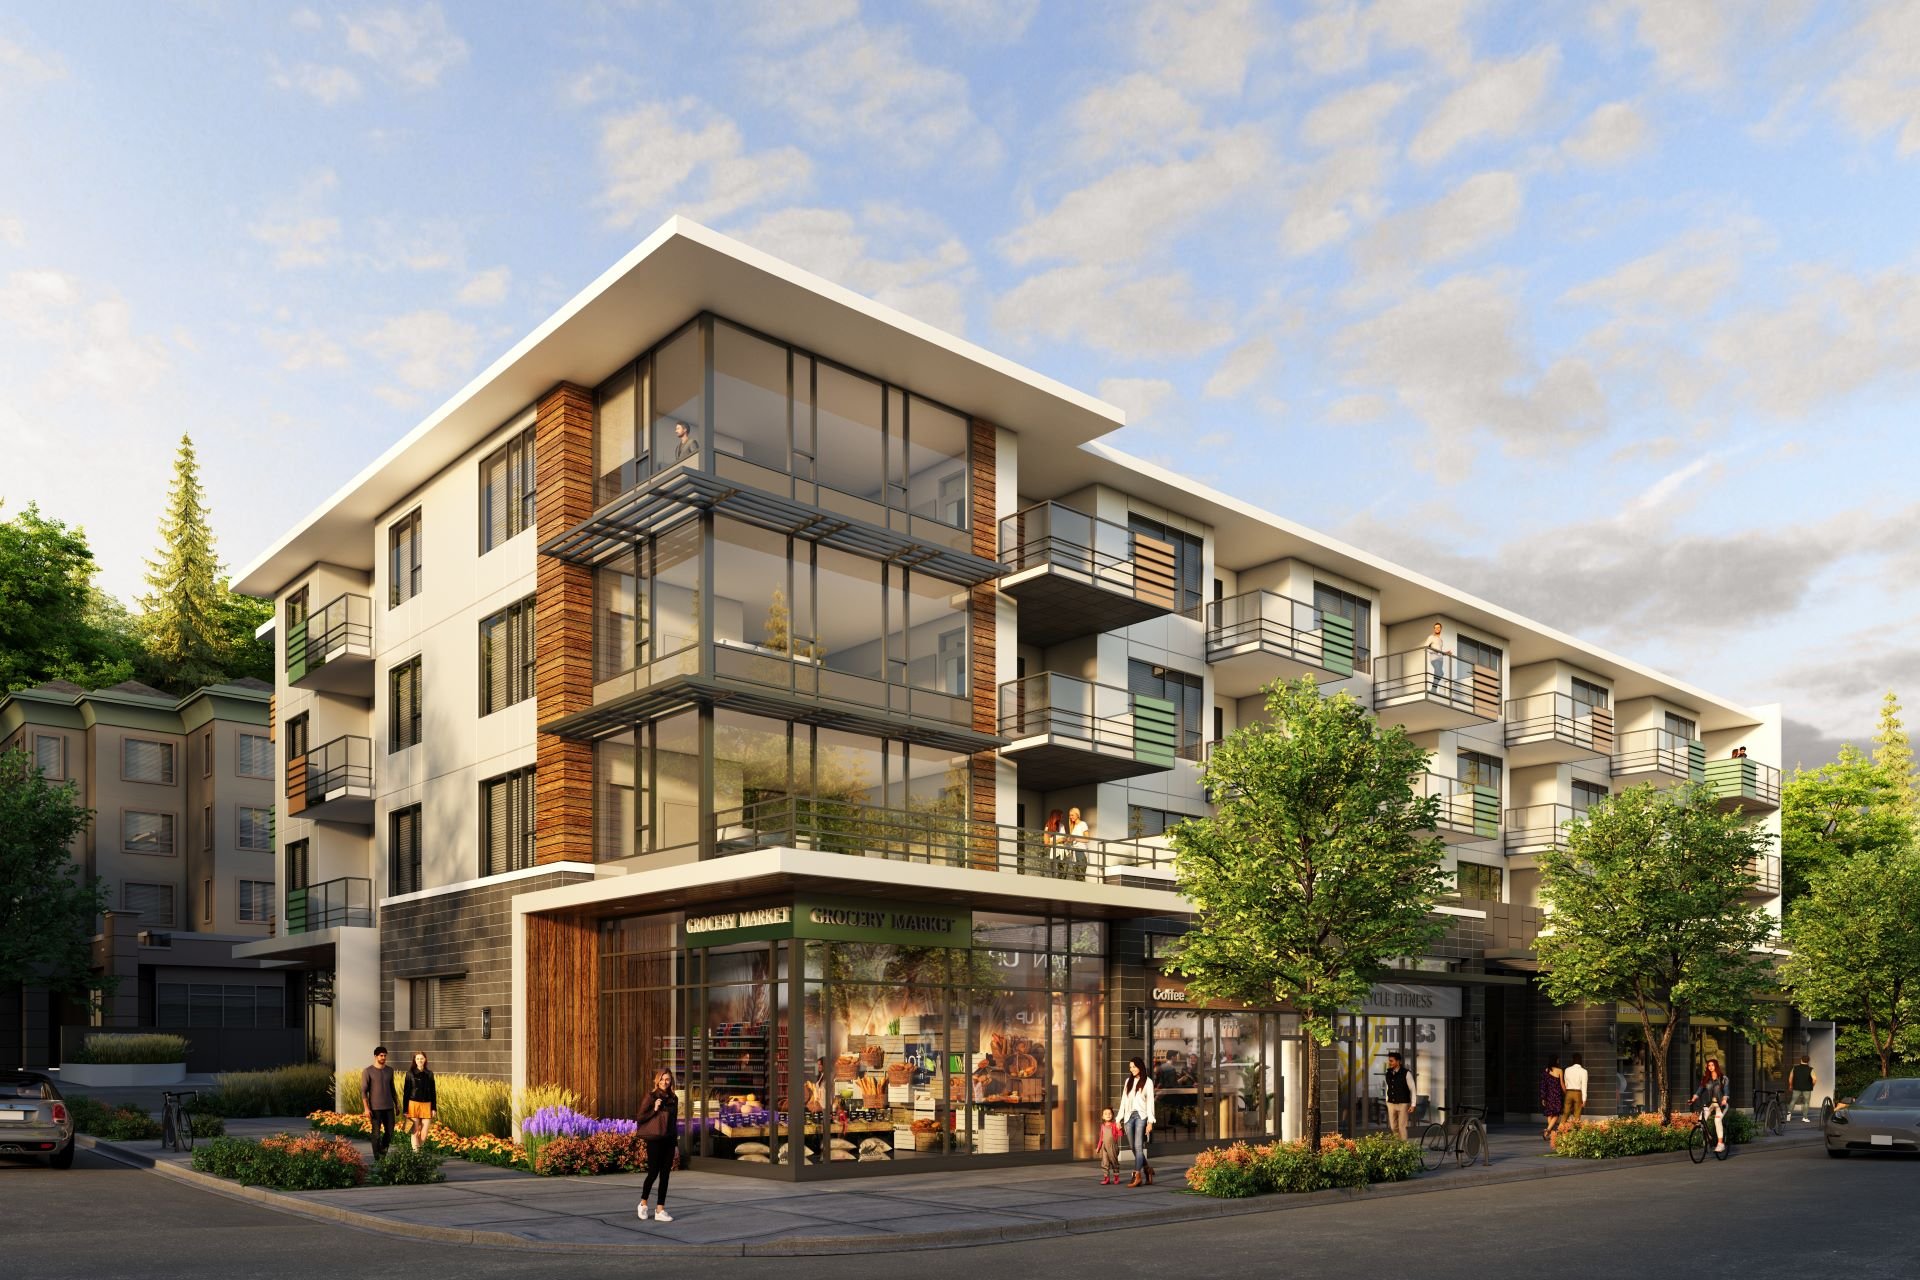 A mixed-use lowrise consisting of four ground-level retail units and 35 condominiums.